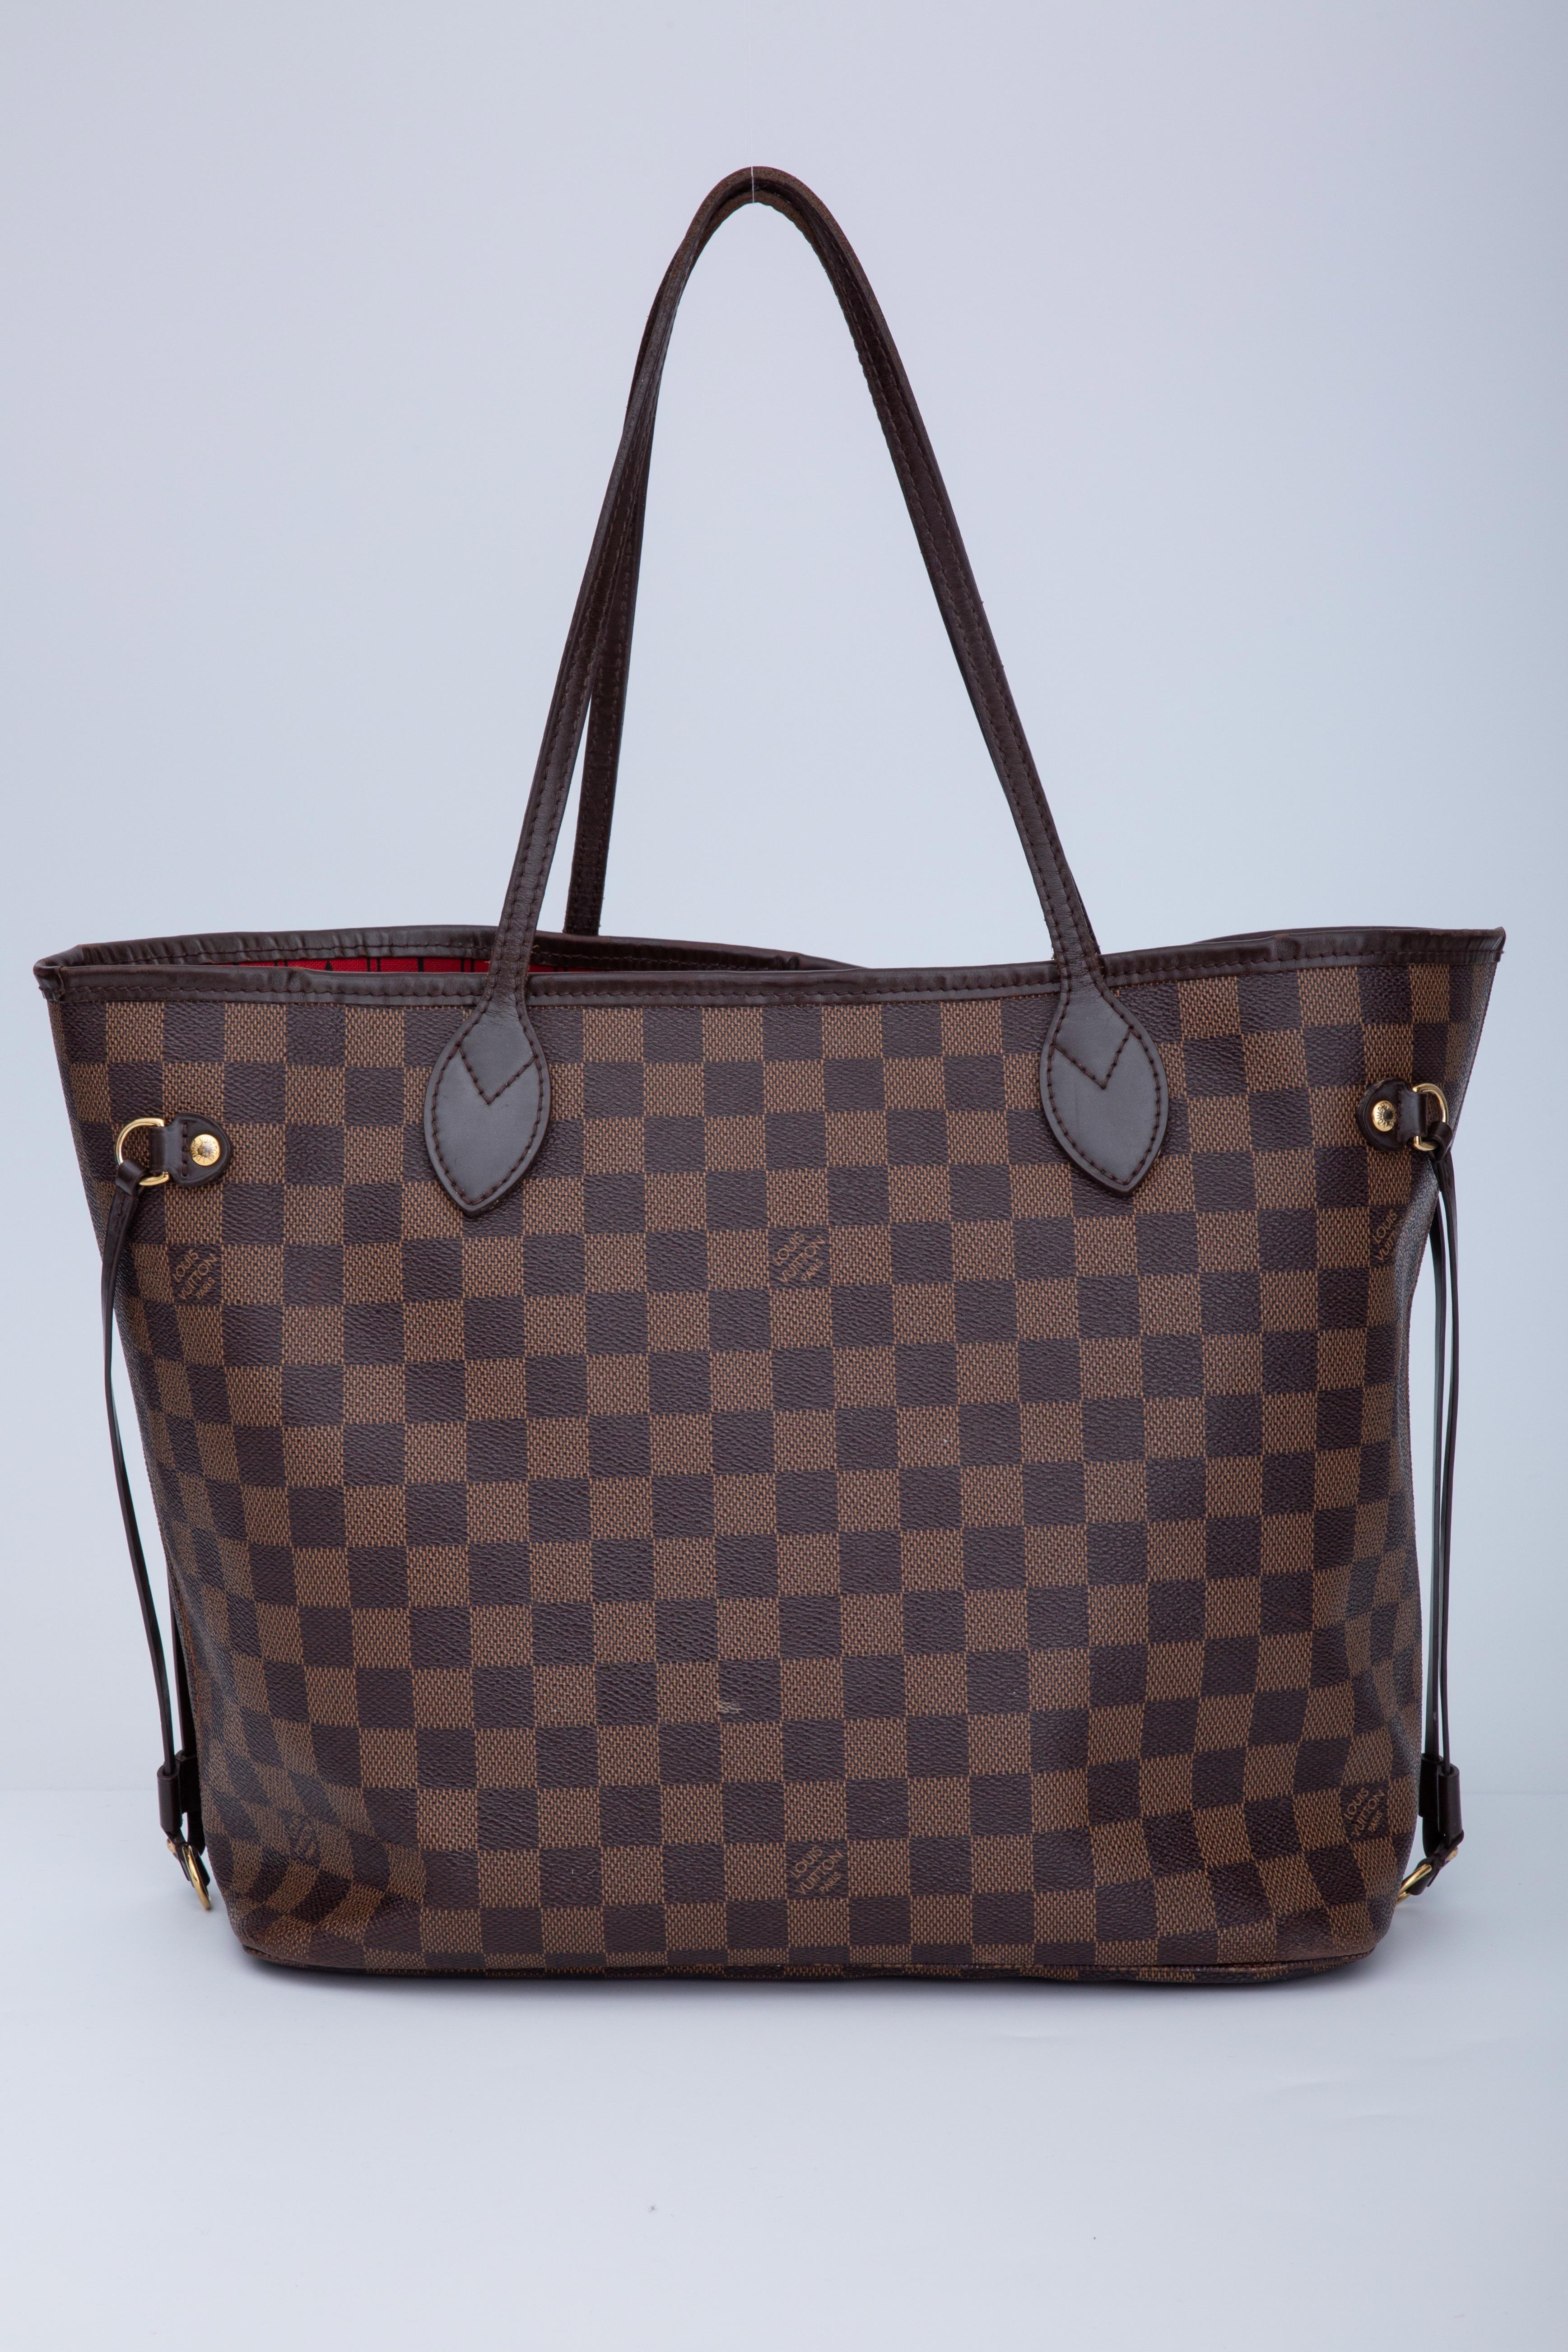 The medium version from Louis Vuitton's classic Neverfull tote collection is made with damier ebene coated canvas with smooth brown leather trim and finishes. The leather on this bag is water and stain resistant. The bag is finished with gold-tone